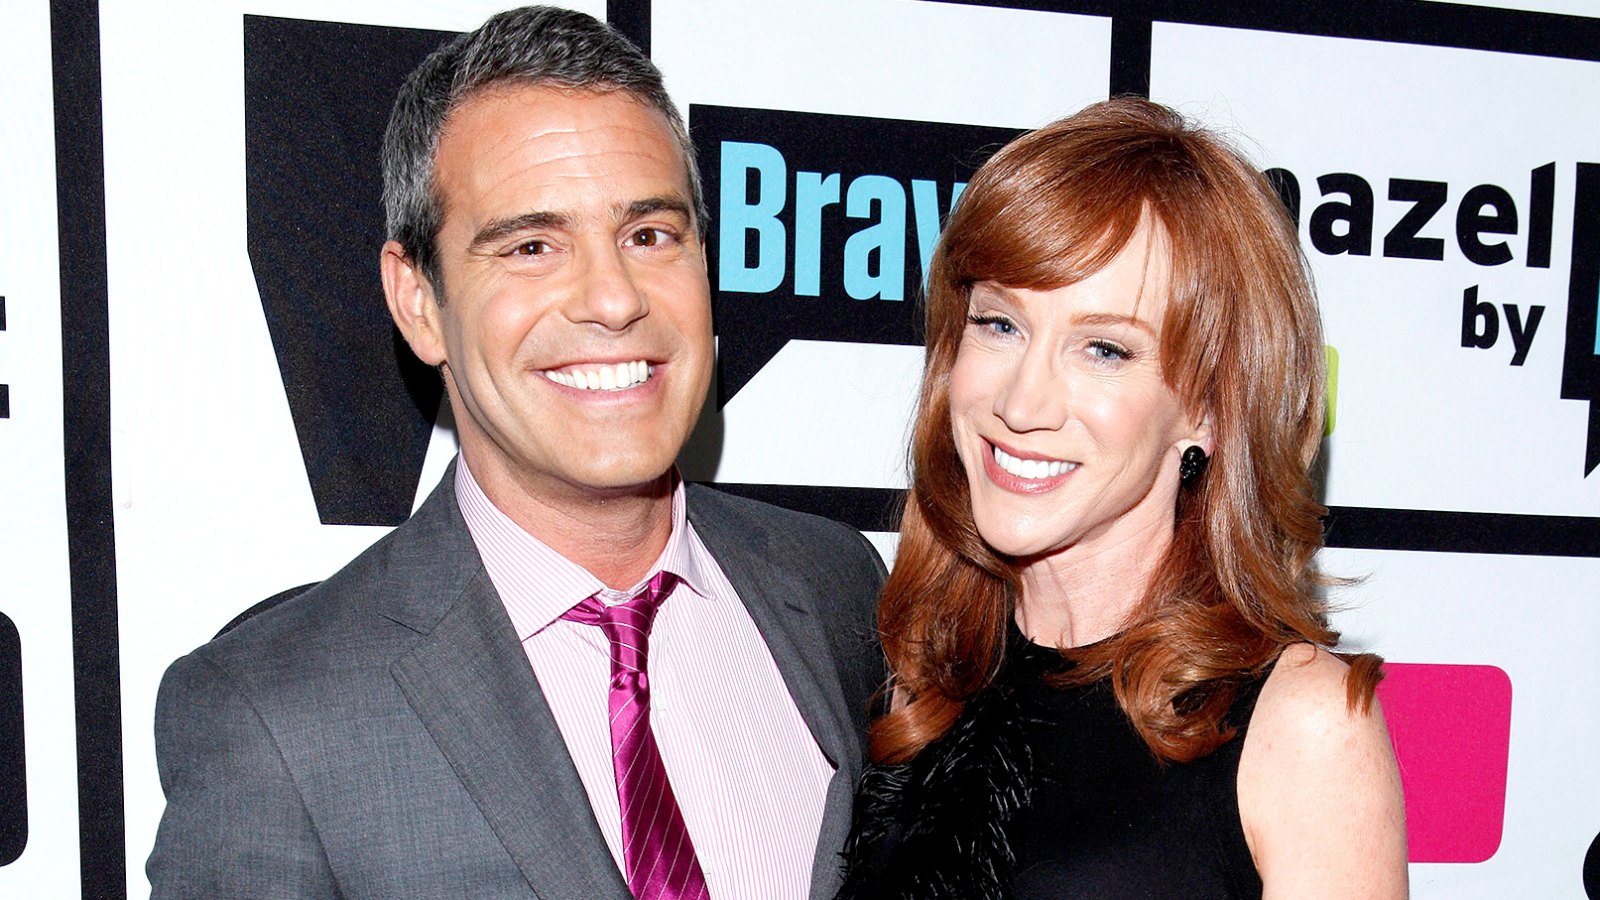 Andy-Cohen-Kathy-Griffin